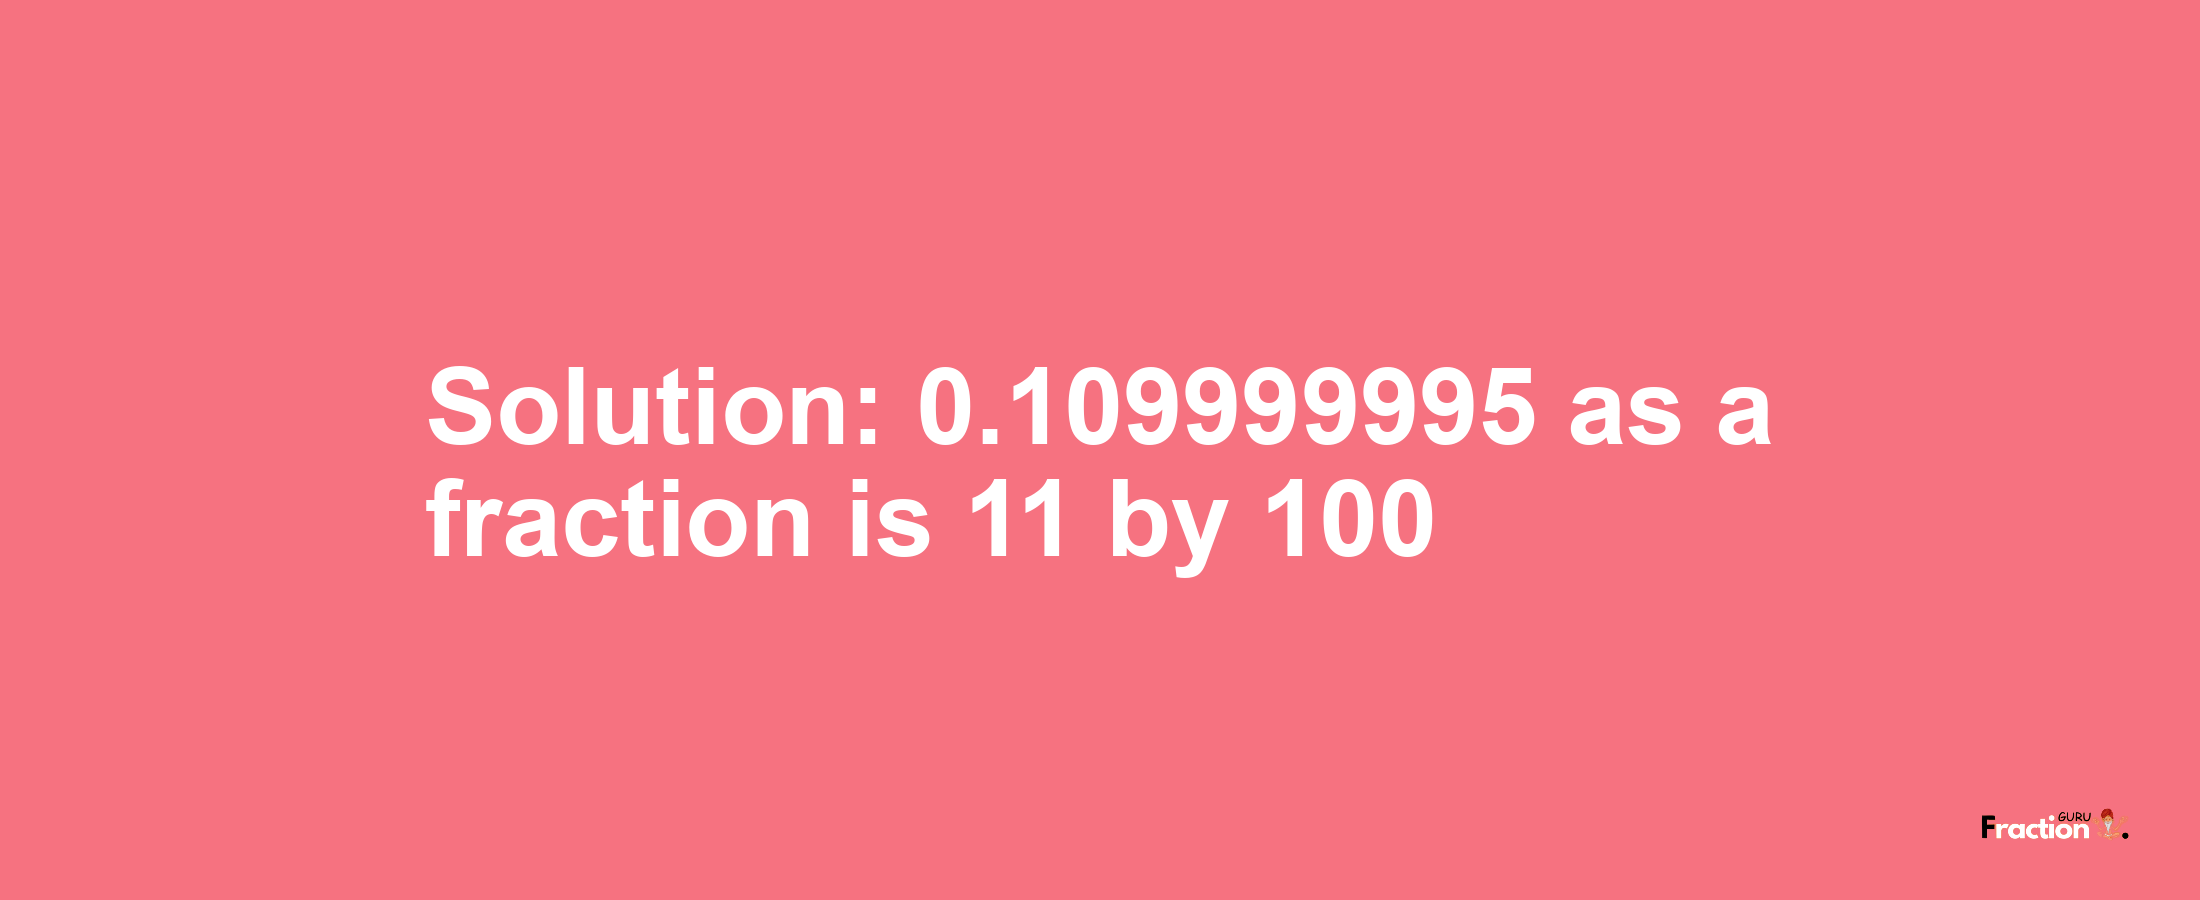 Solution:0.109999995 as a fraction is 11/100